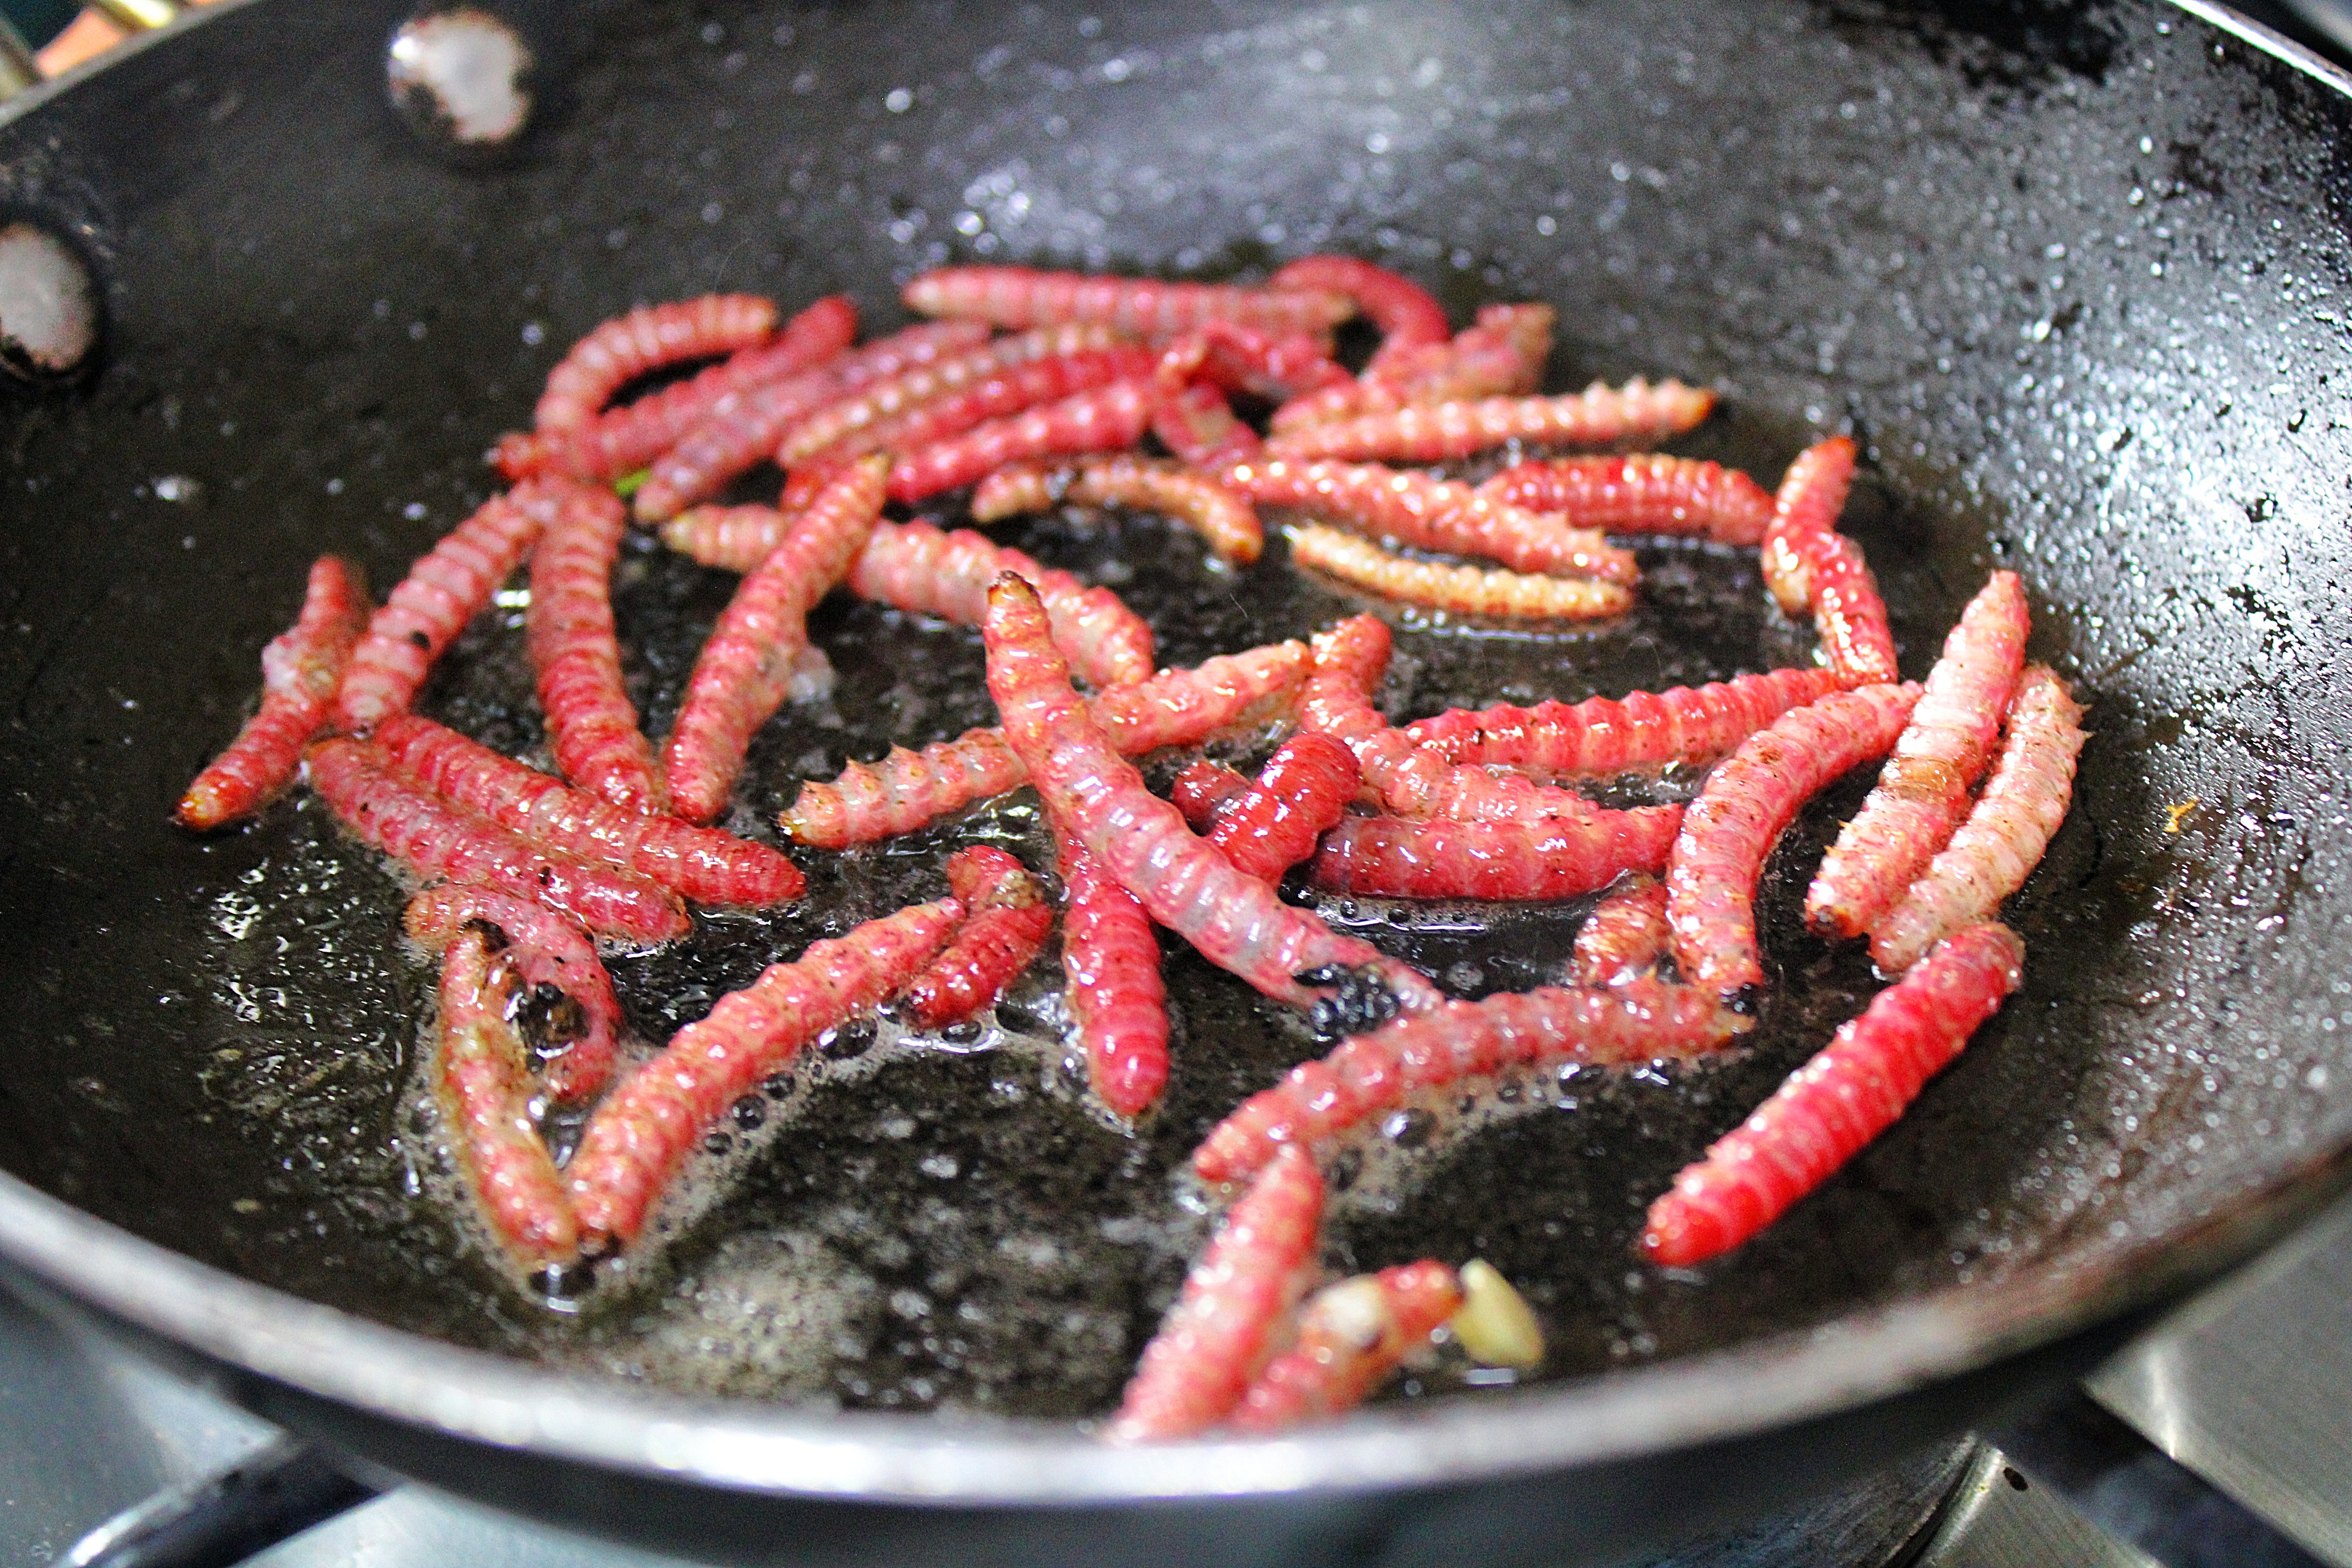 Worms frying in a pan.